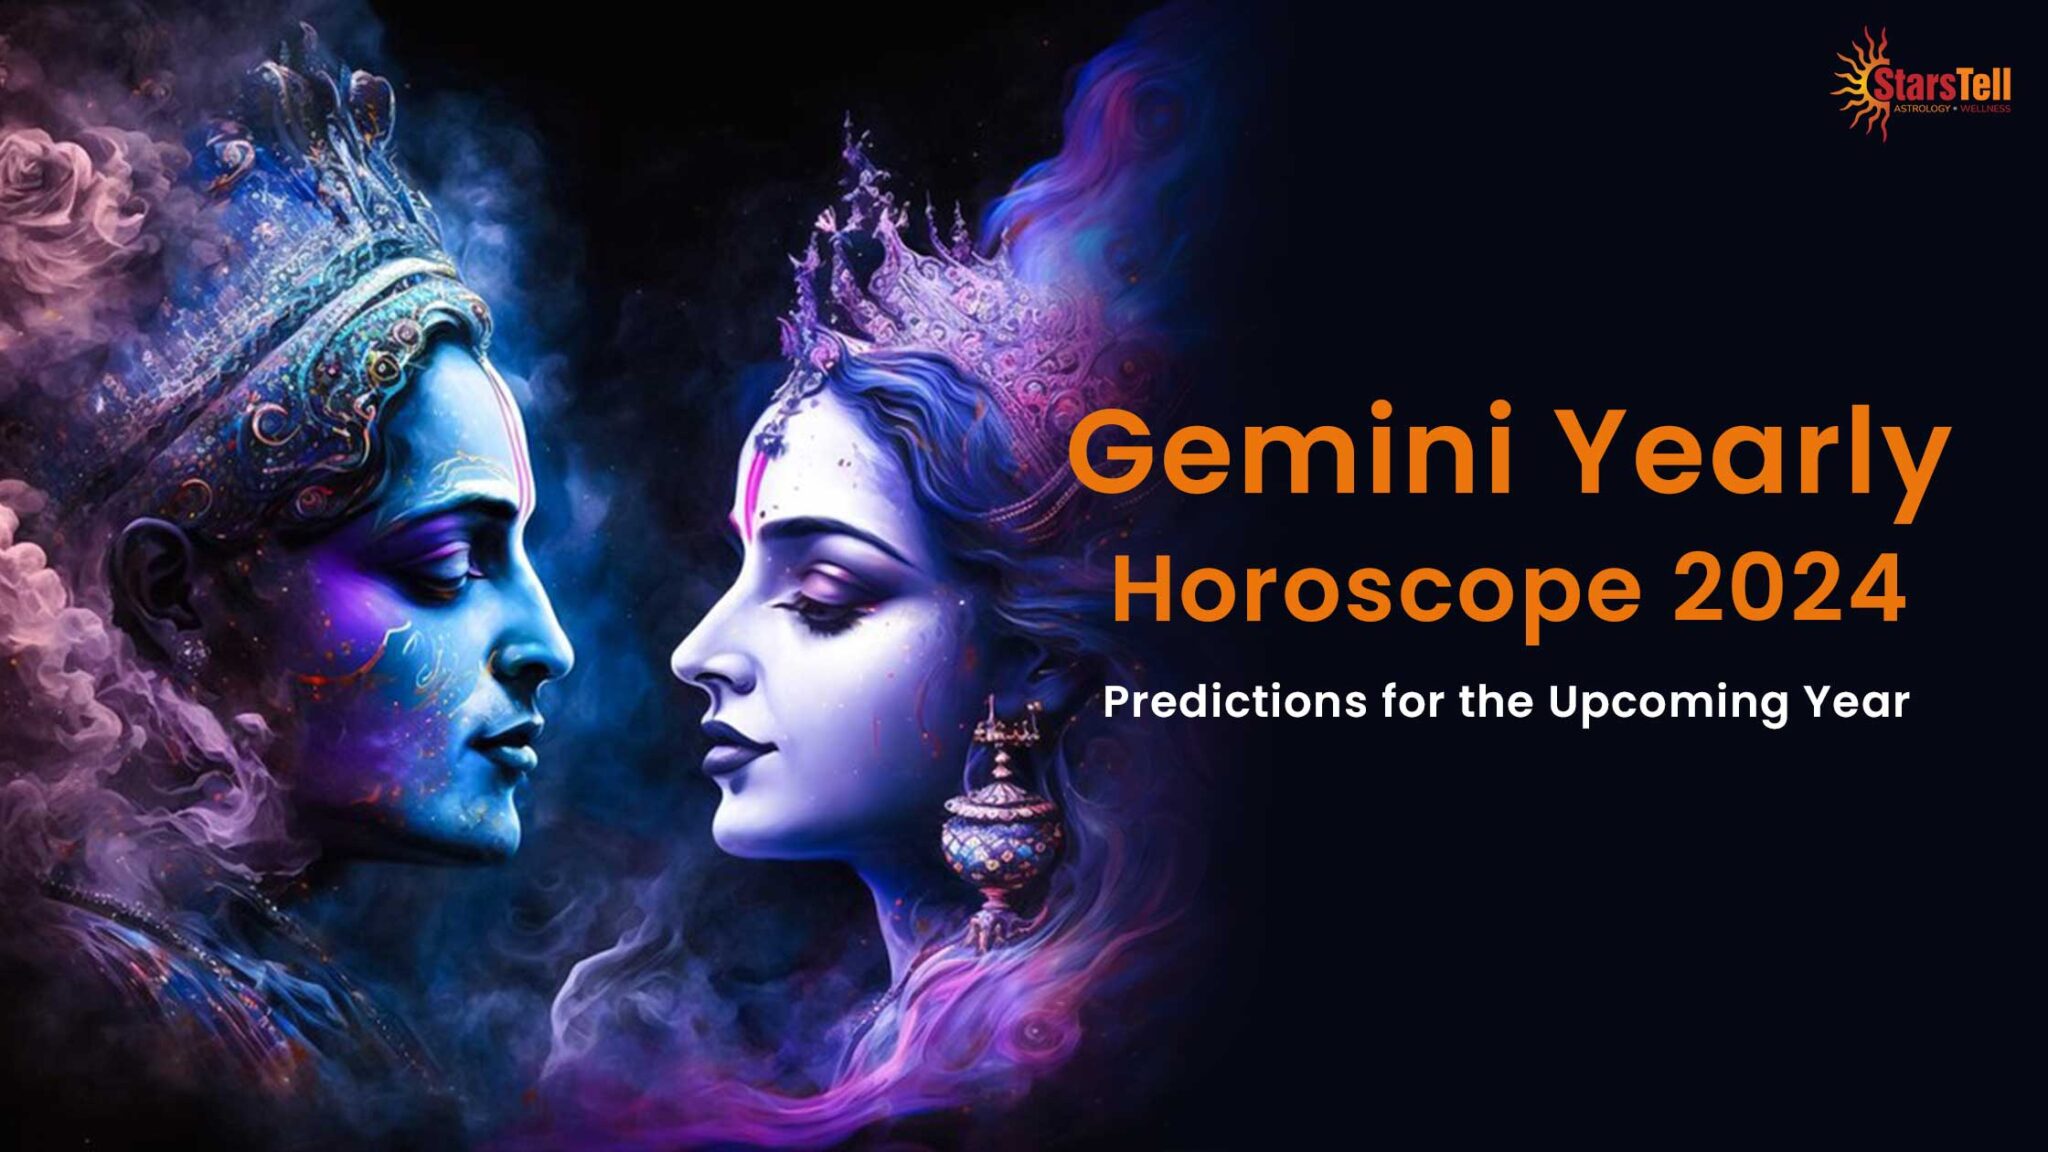 Gemini Yearly Horoscope 2024 Predictions for the Year